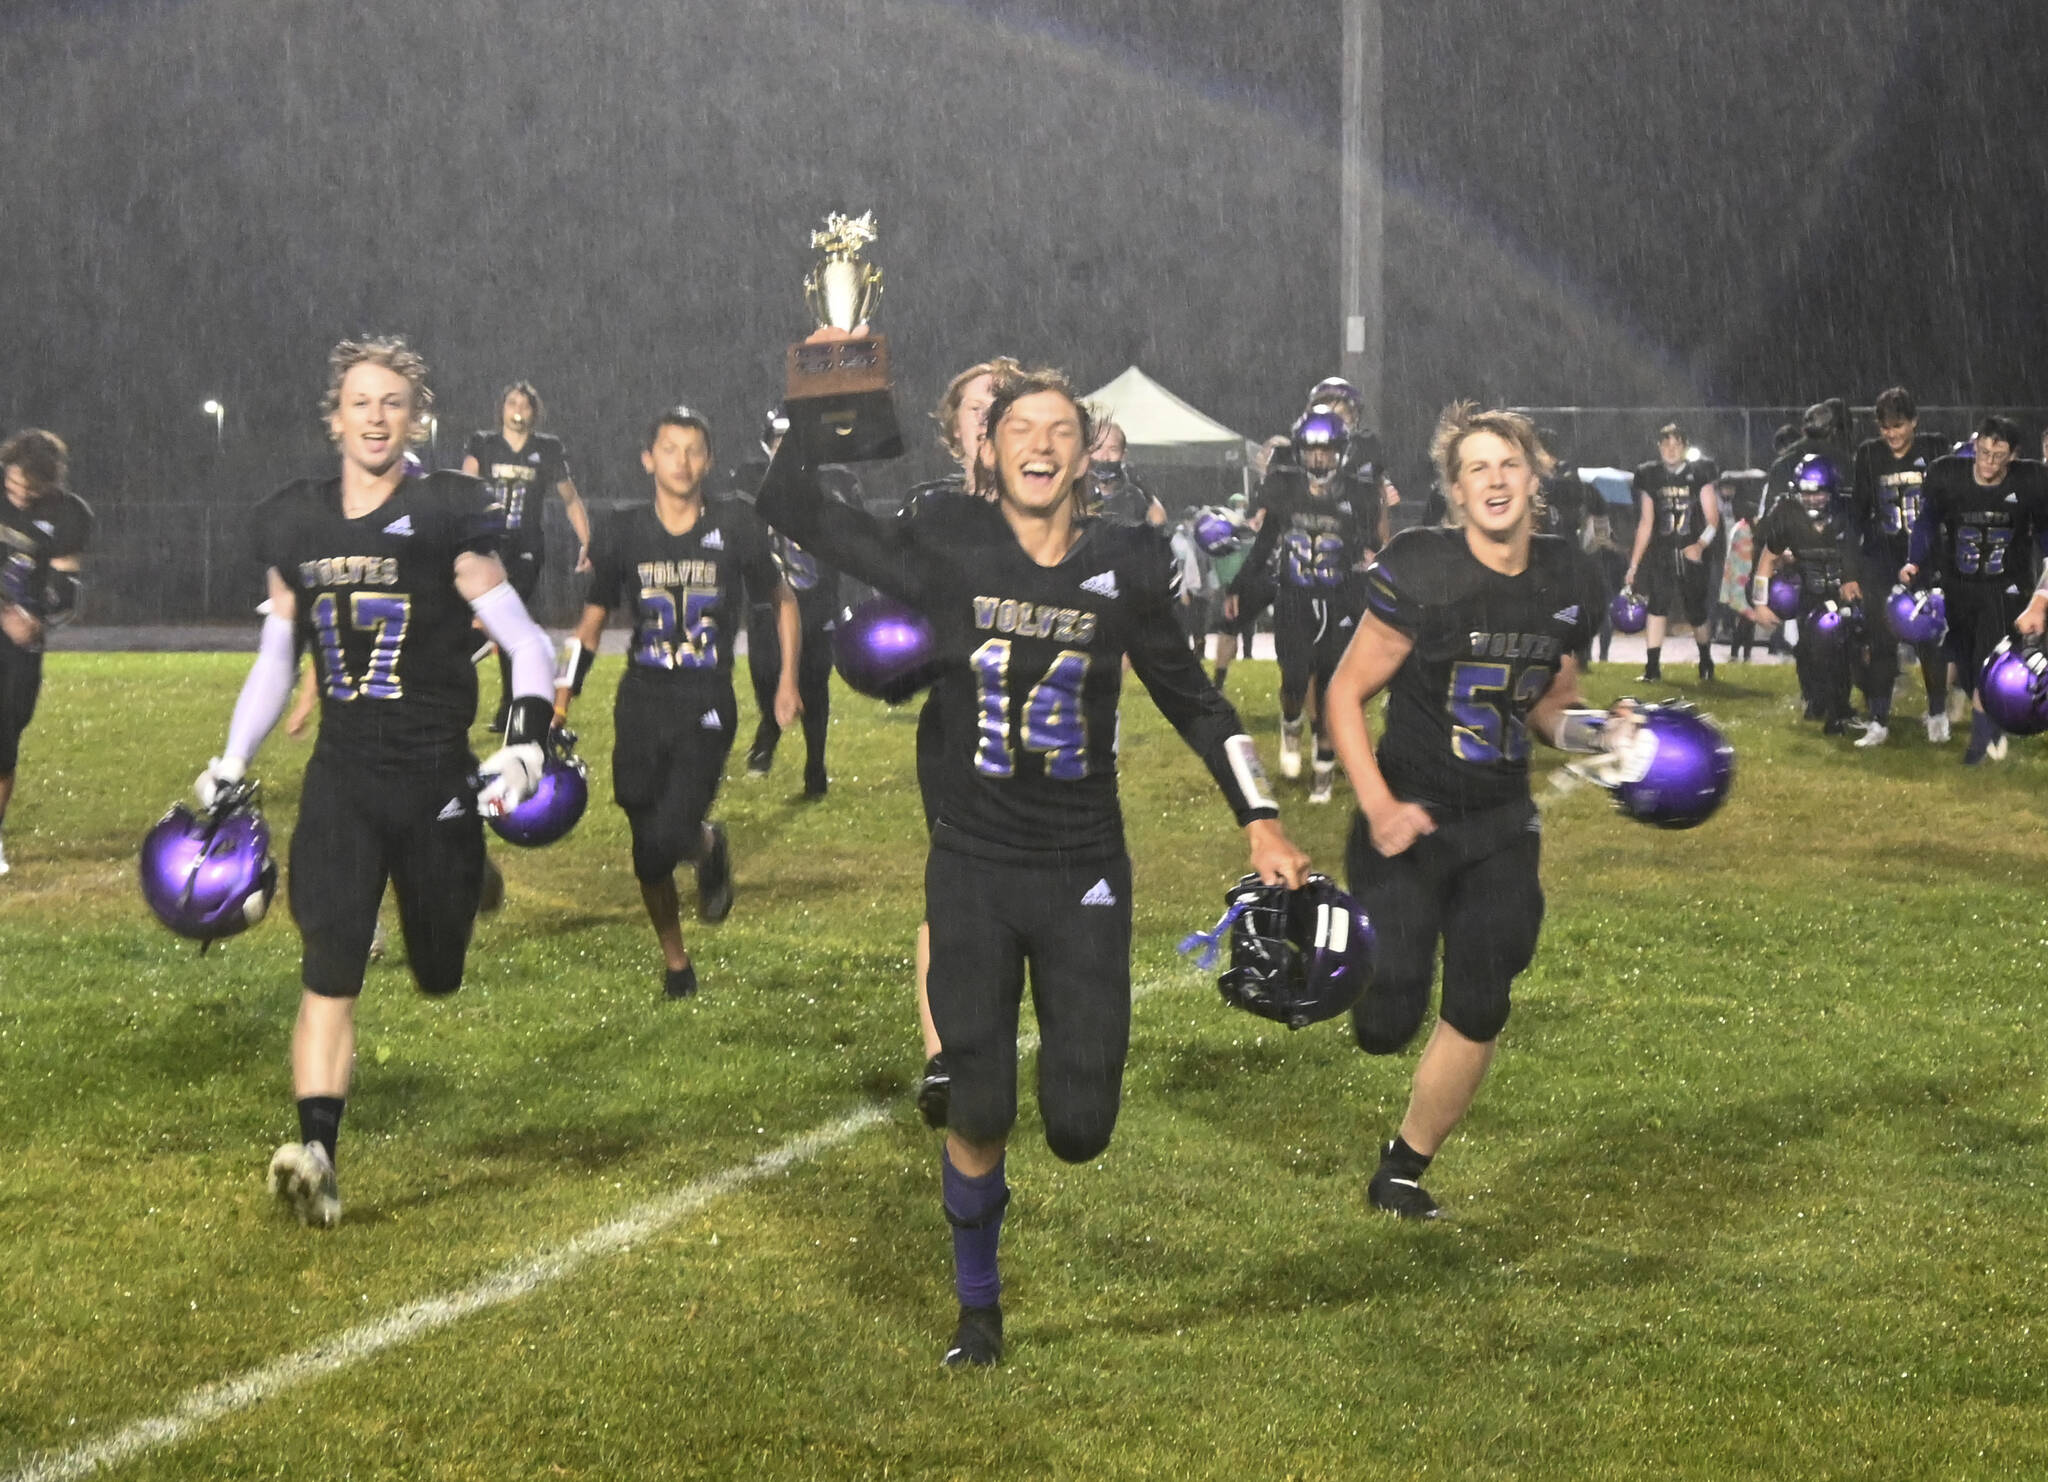 Michael Dashiell/Olympic Peninsula News Group
Sequim's Kobe Applegate holds the Rainshadow Rumble rivalry trophy as the team heads toward the student section to sing the school fight song after a 17-12 win over Port Angeles on Friday.